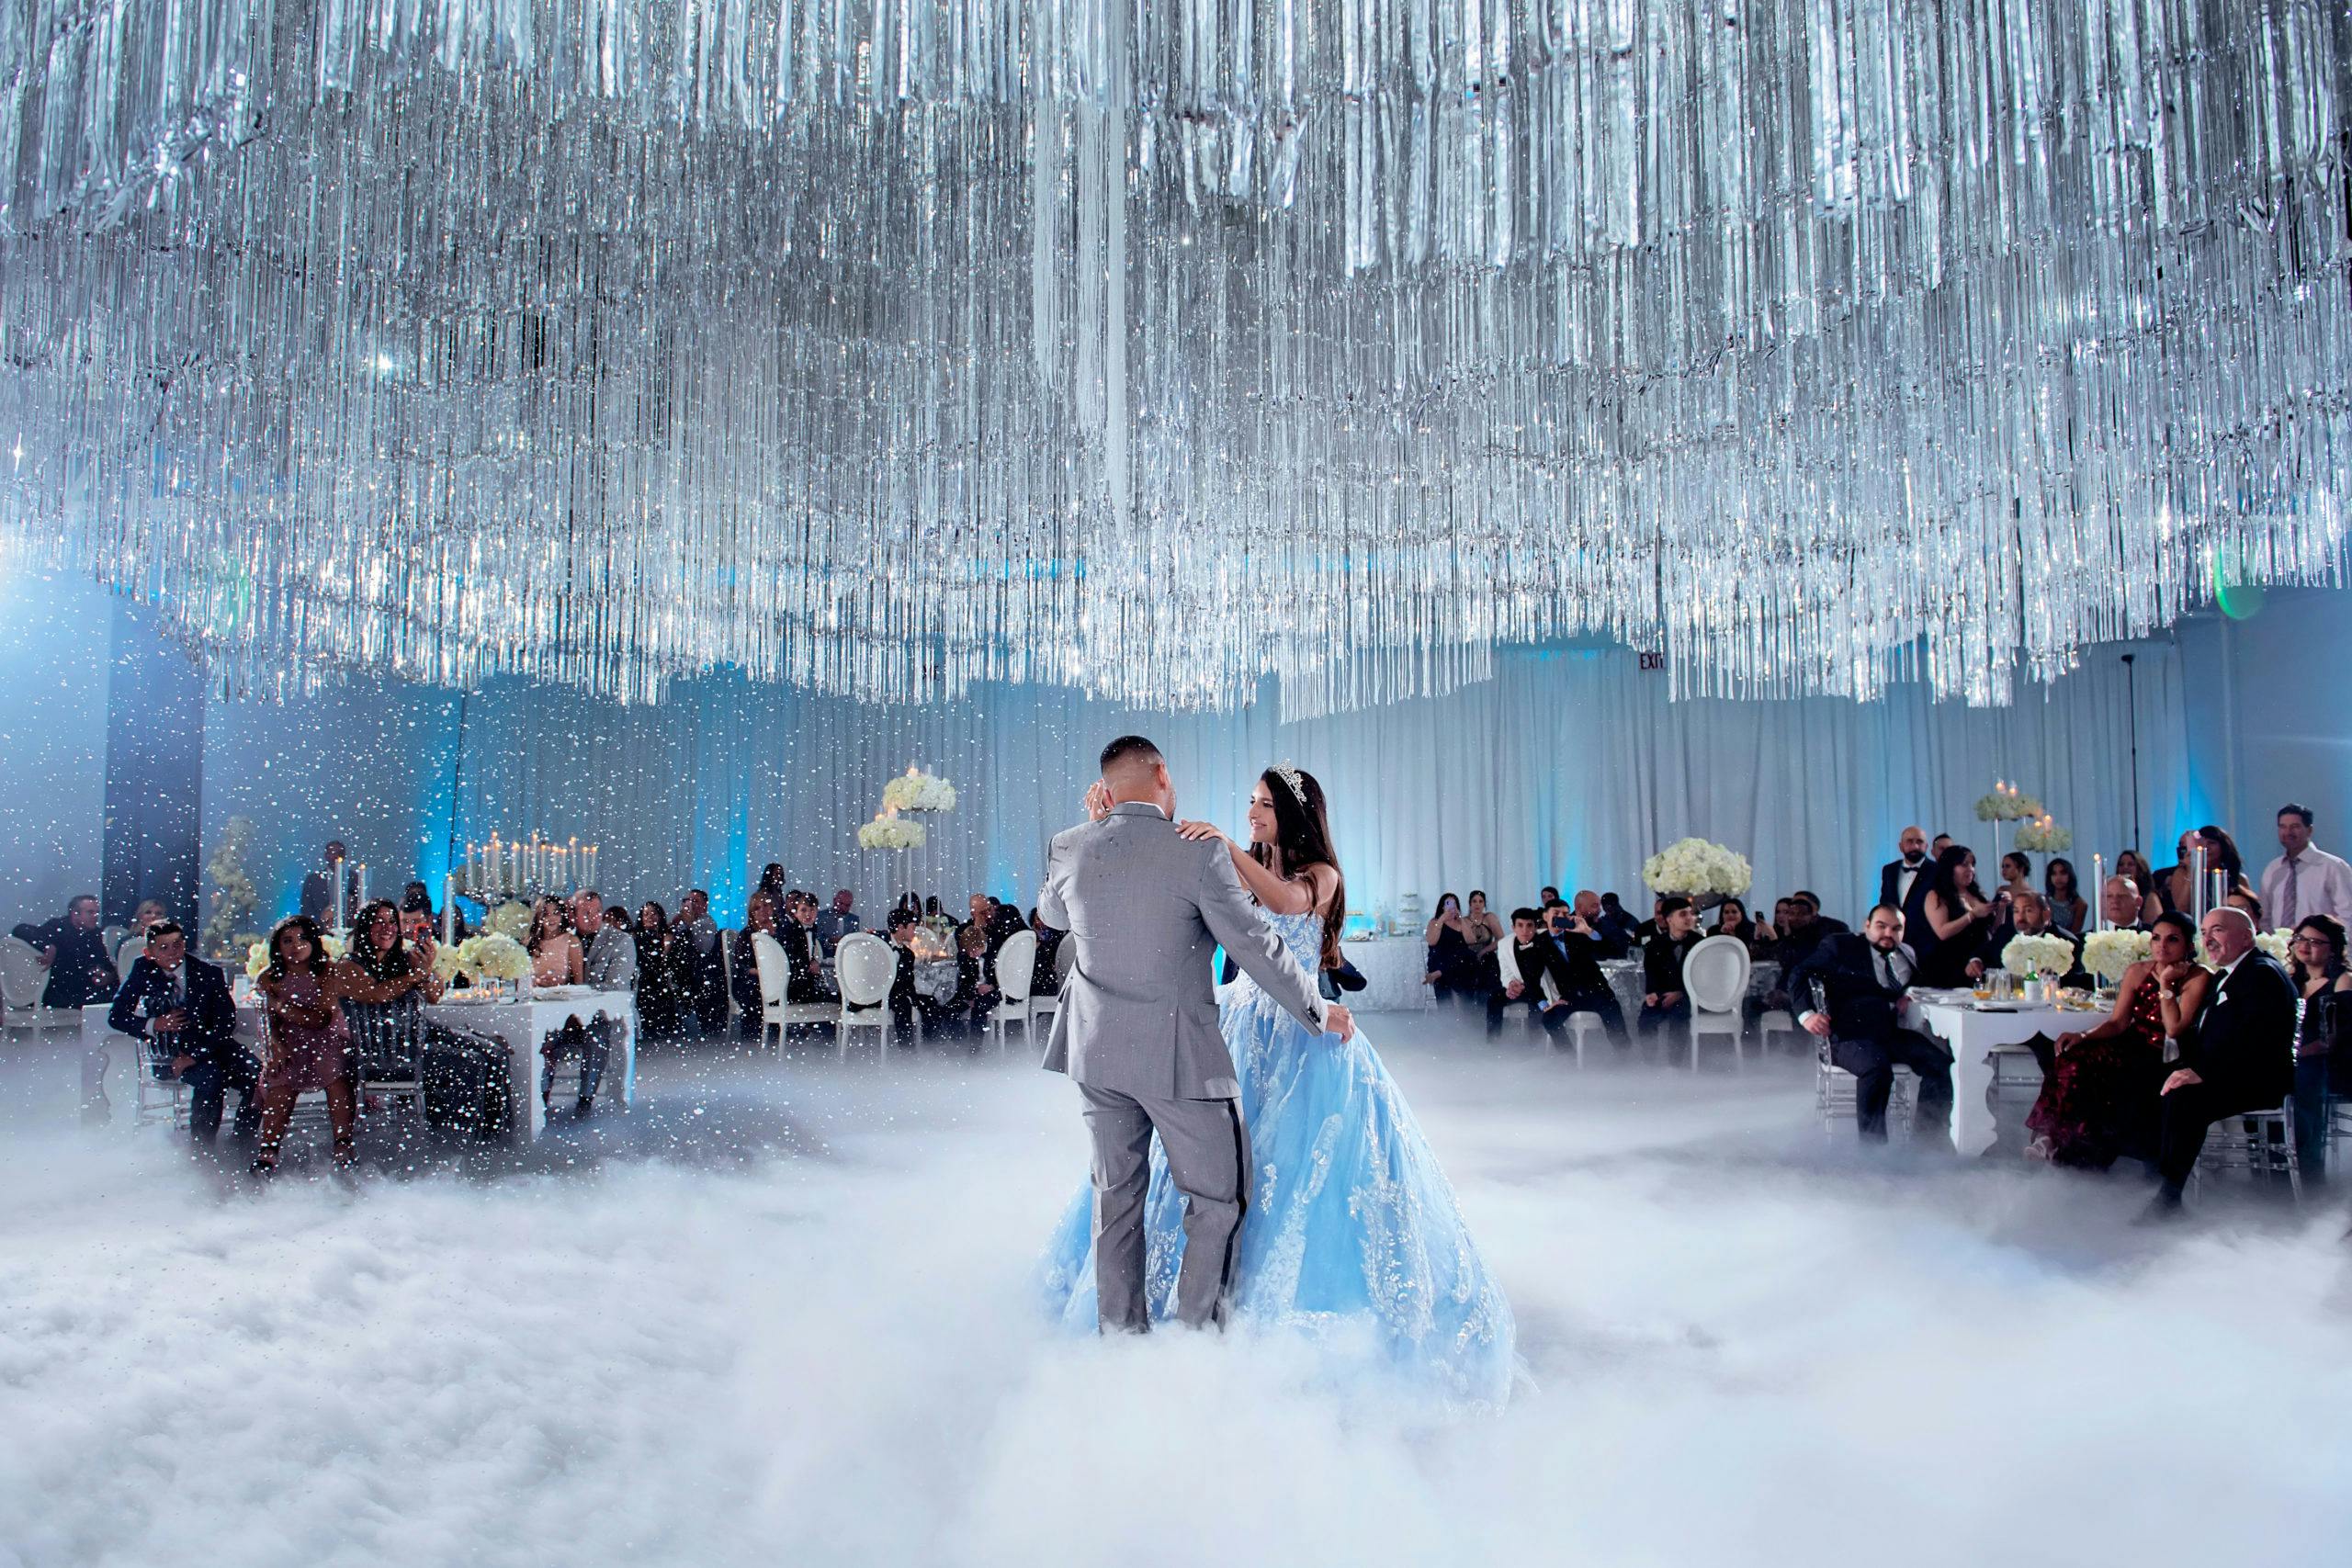 Father and Daughter Dance Through Fog Underneath Crystal Ceiling Installation at Winter Wonderland-Themed Quinceañera celebration